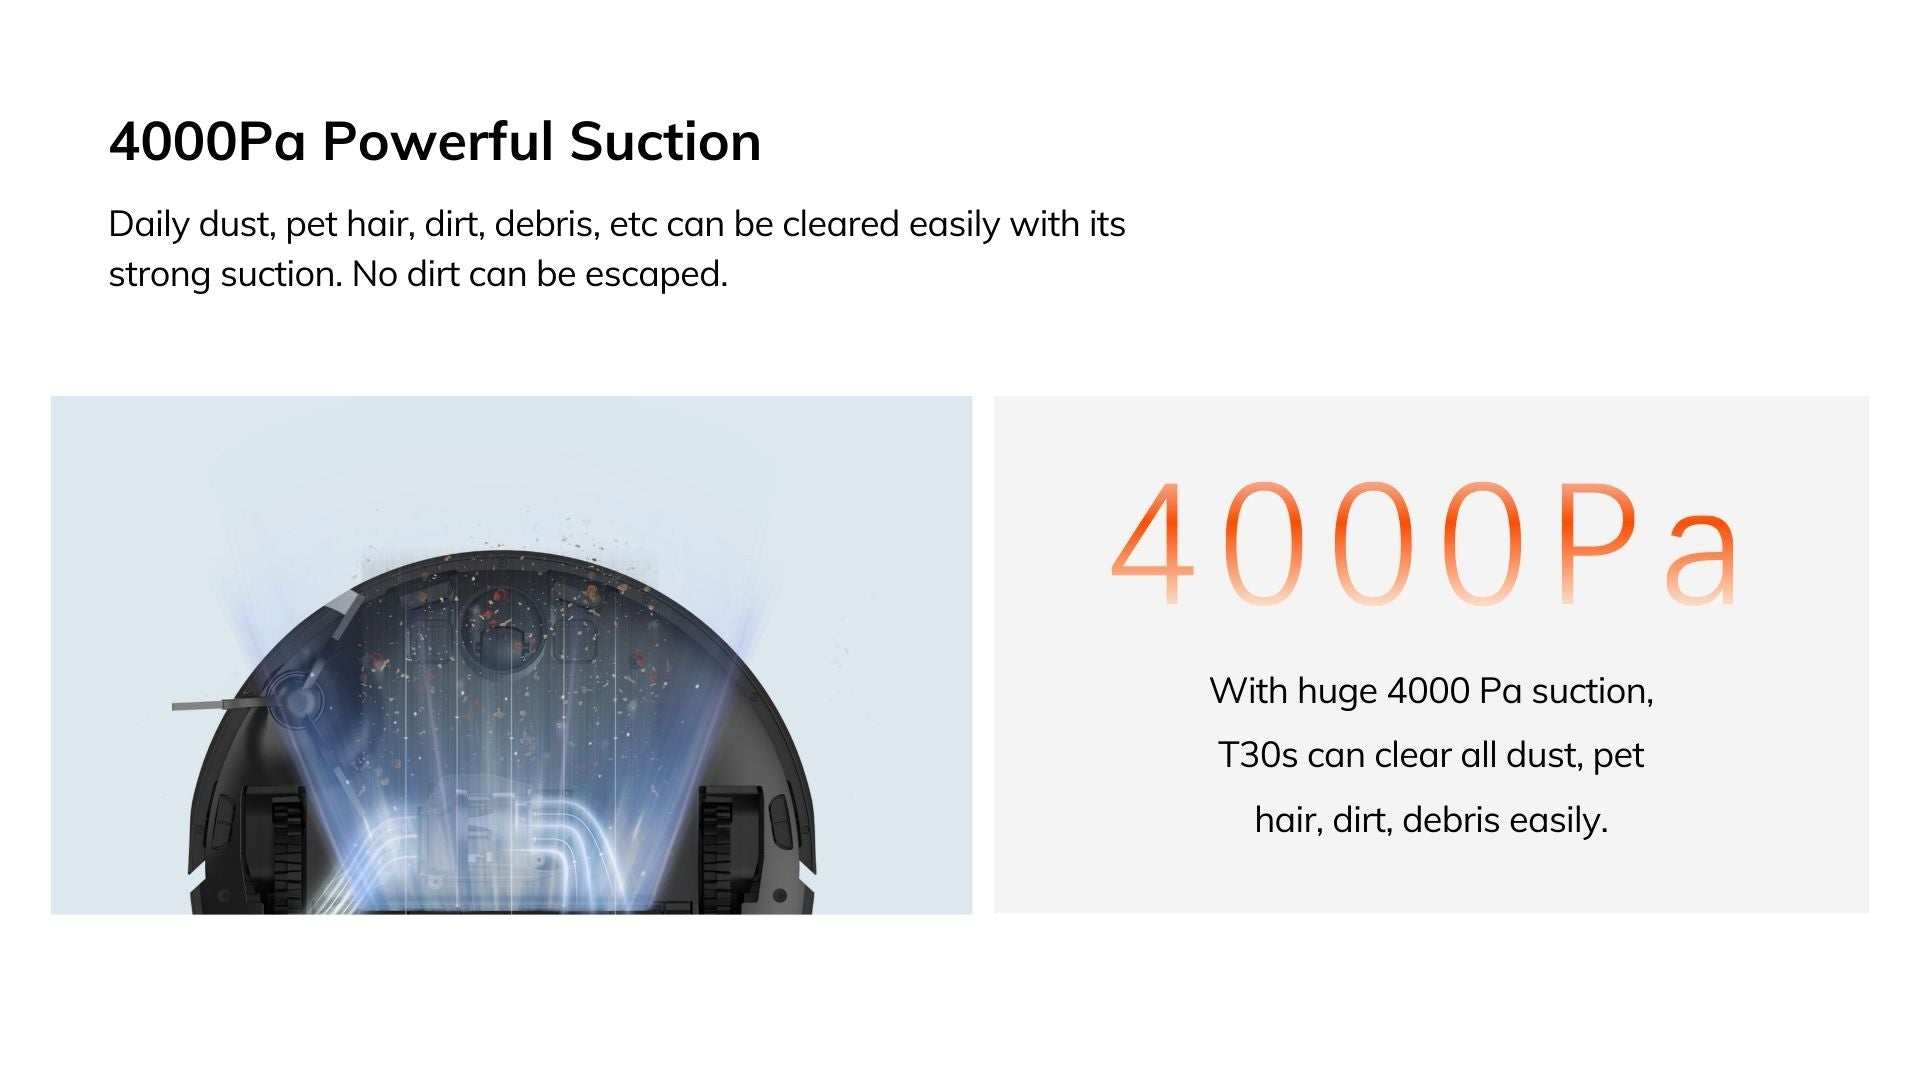 4000Pa powerful suction